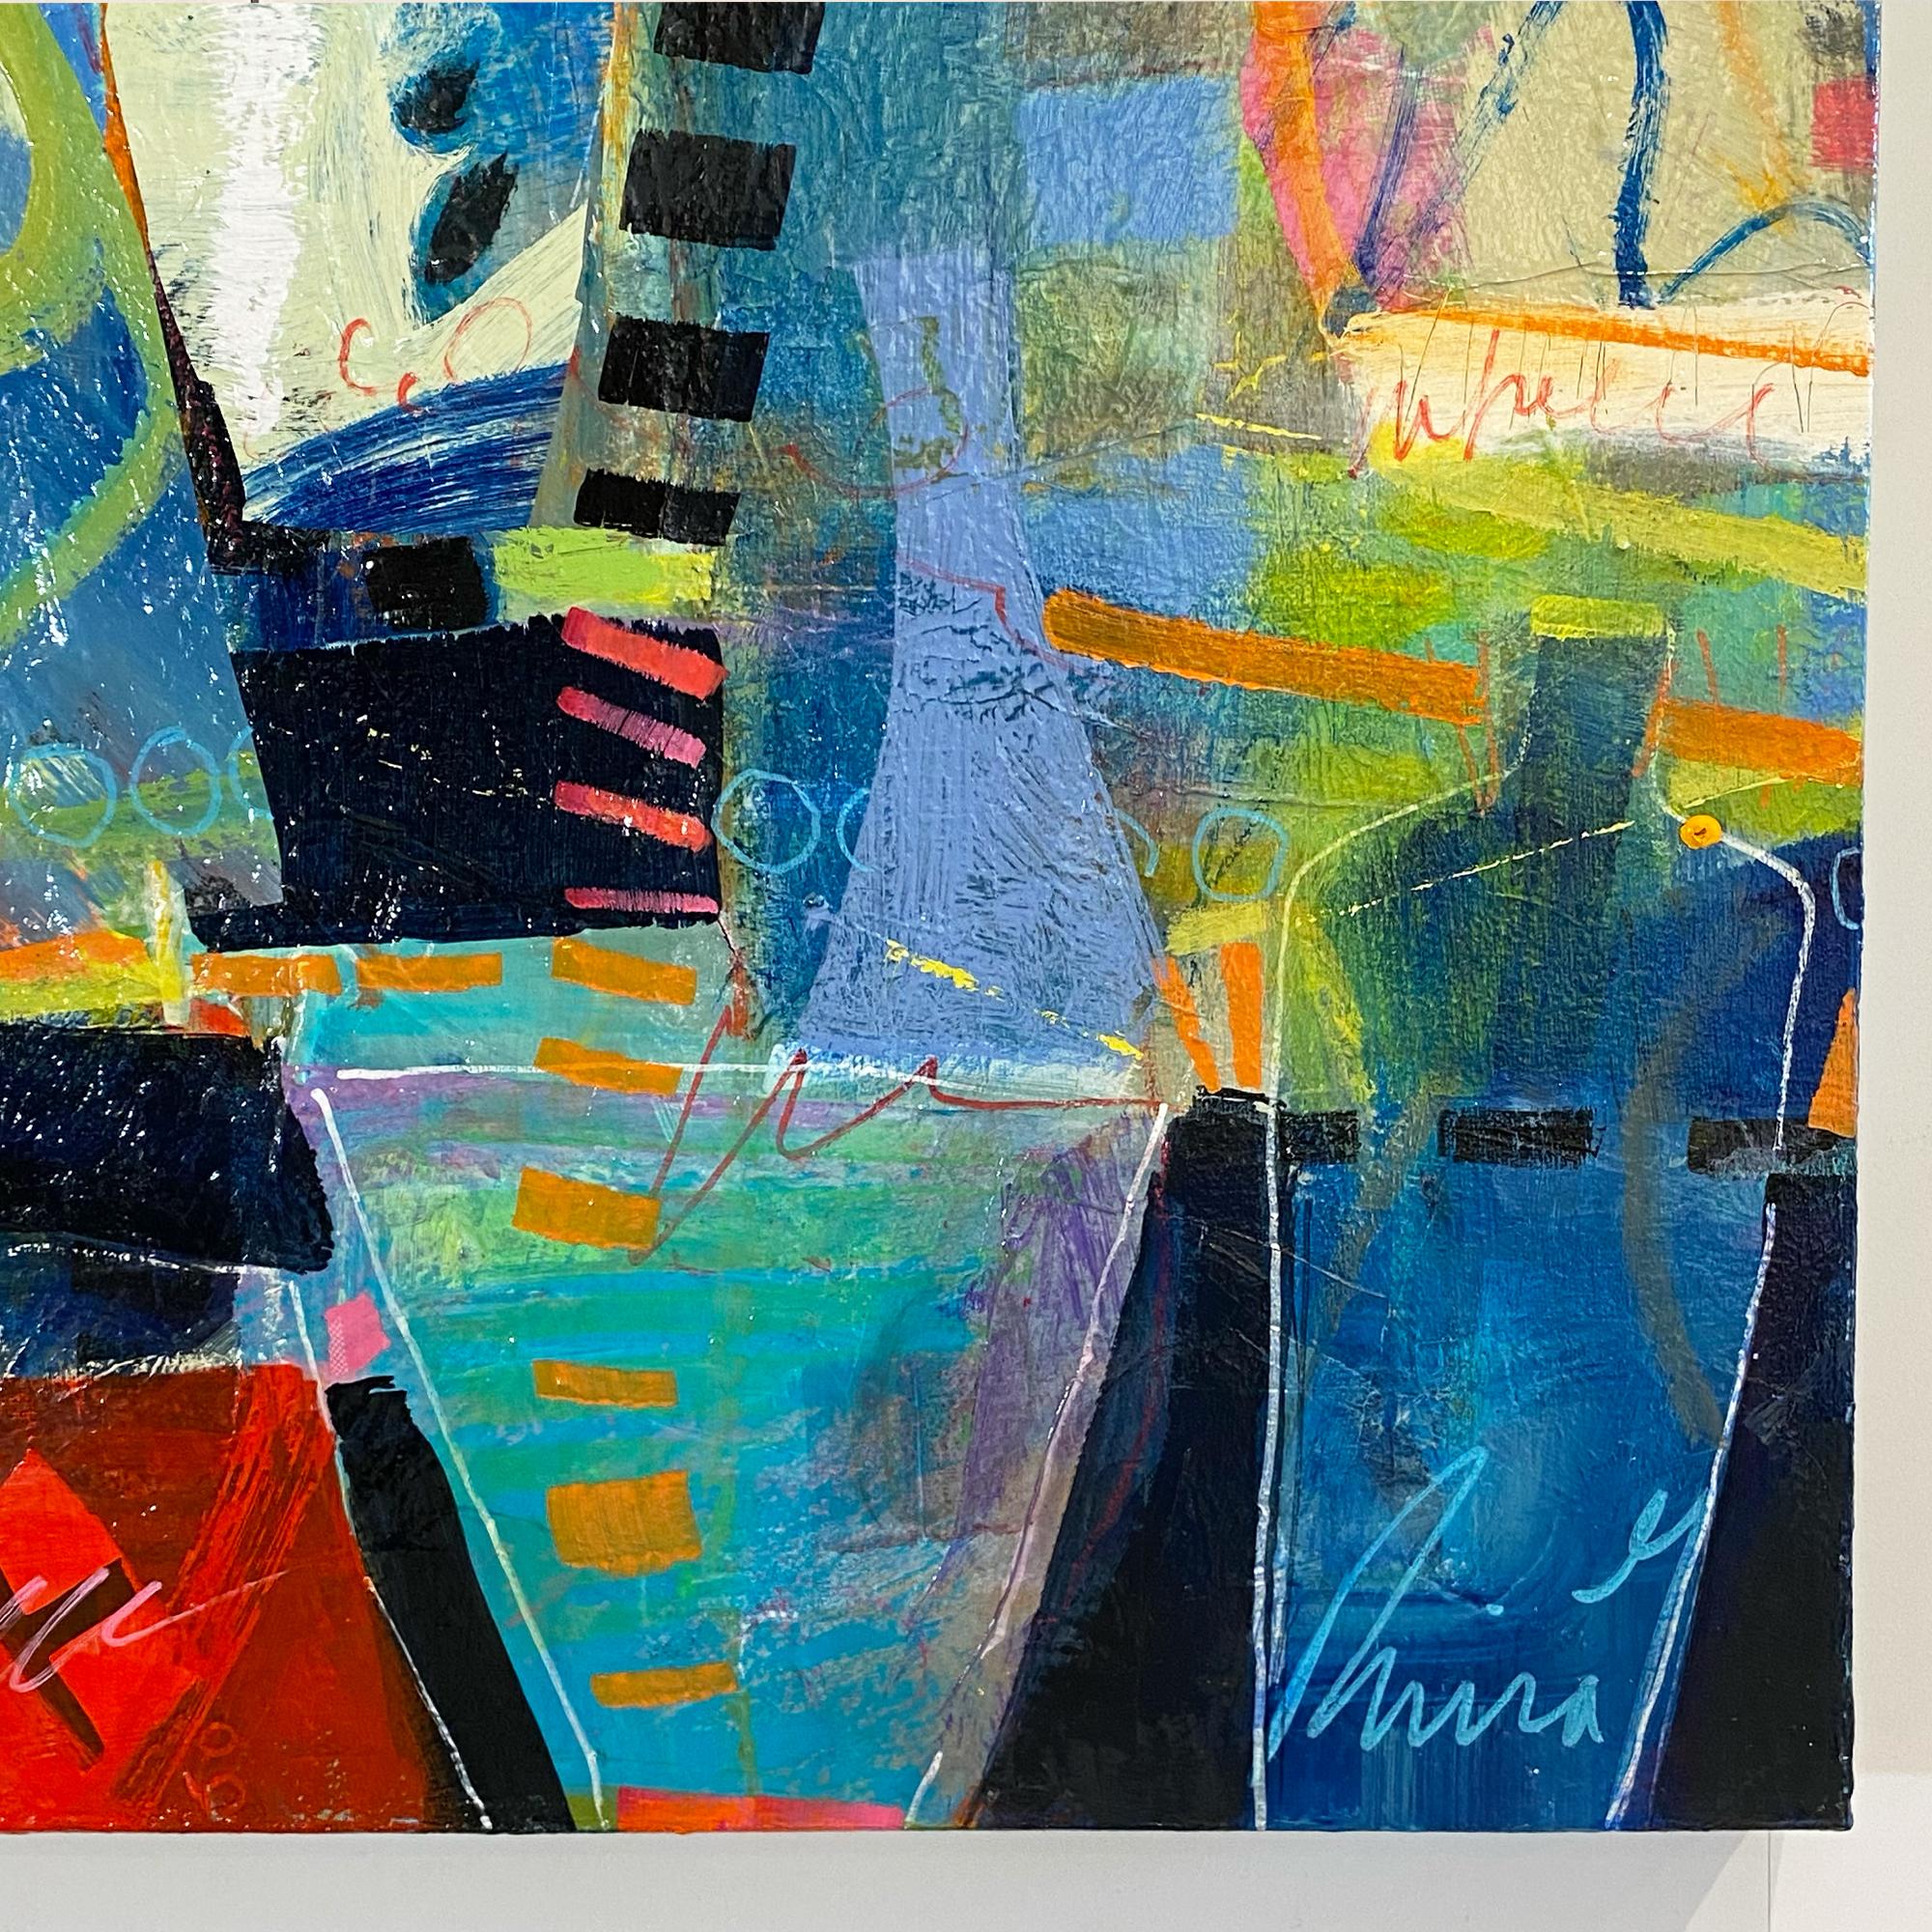 Reflecting a strong sense of colour and design, and through the use of line and texture, Rina’s abstract paintings are bold and expressive. Whether working in acrylic or mixed media, Rina is always seeking to explore and create new and interesting